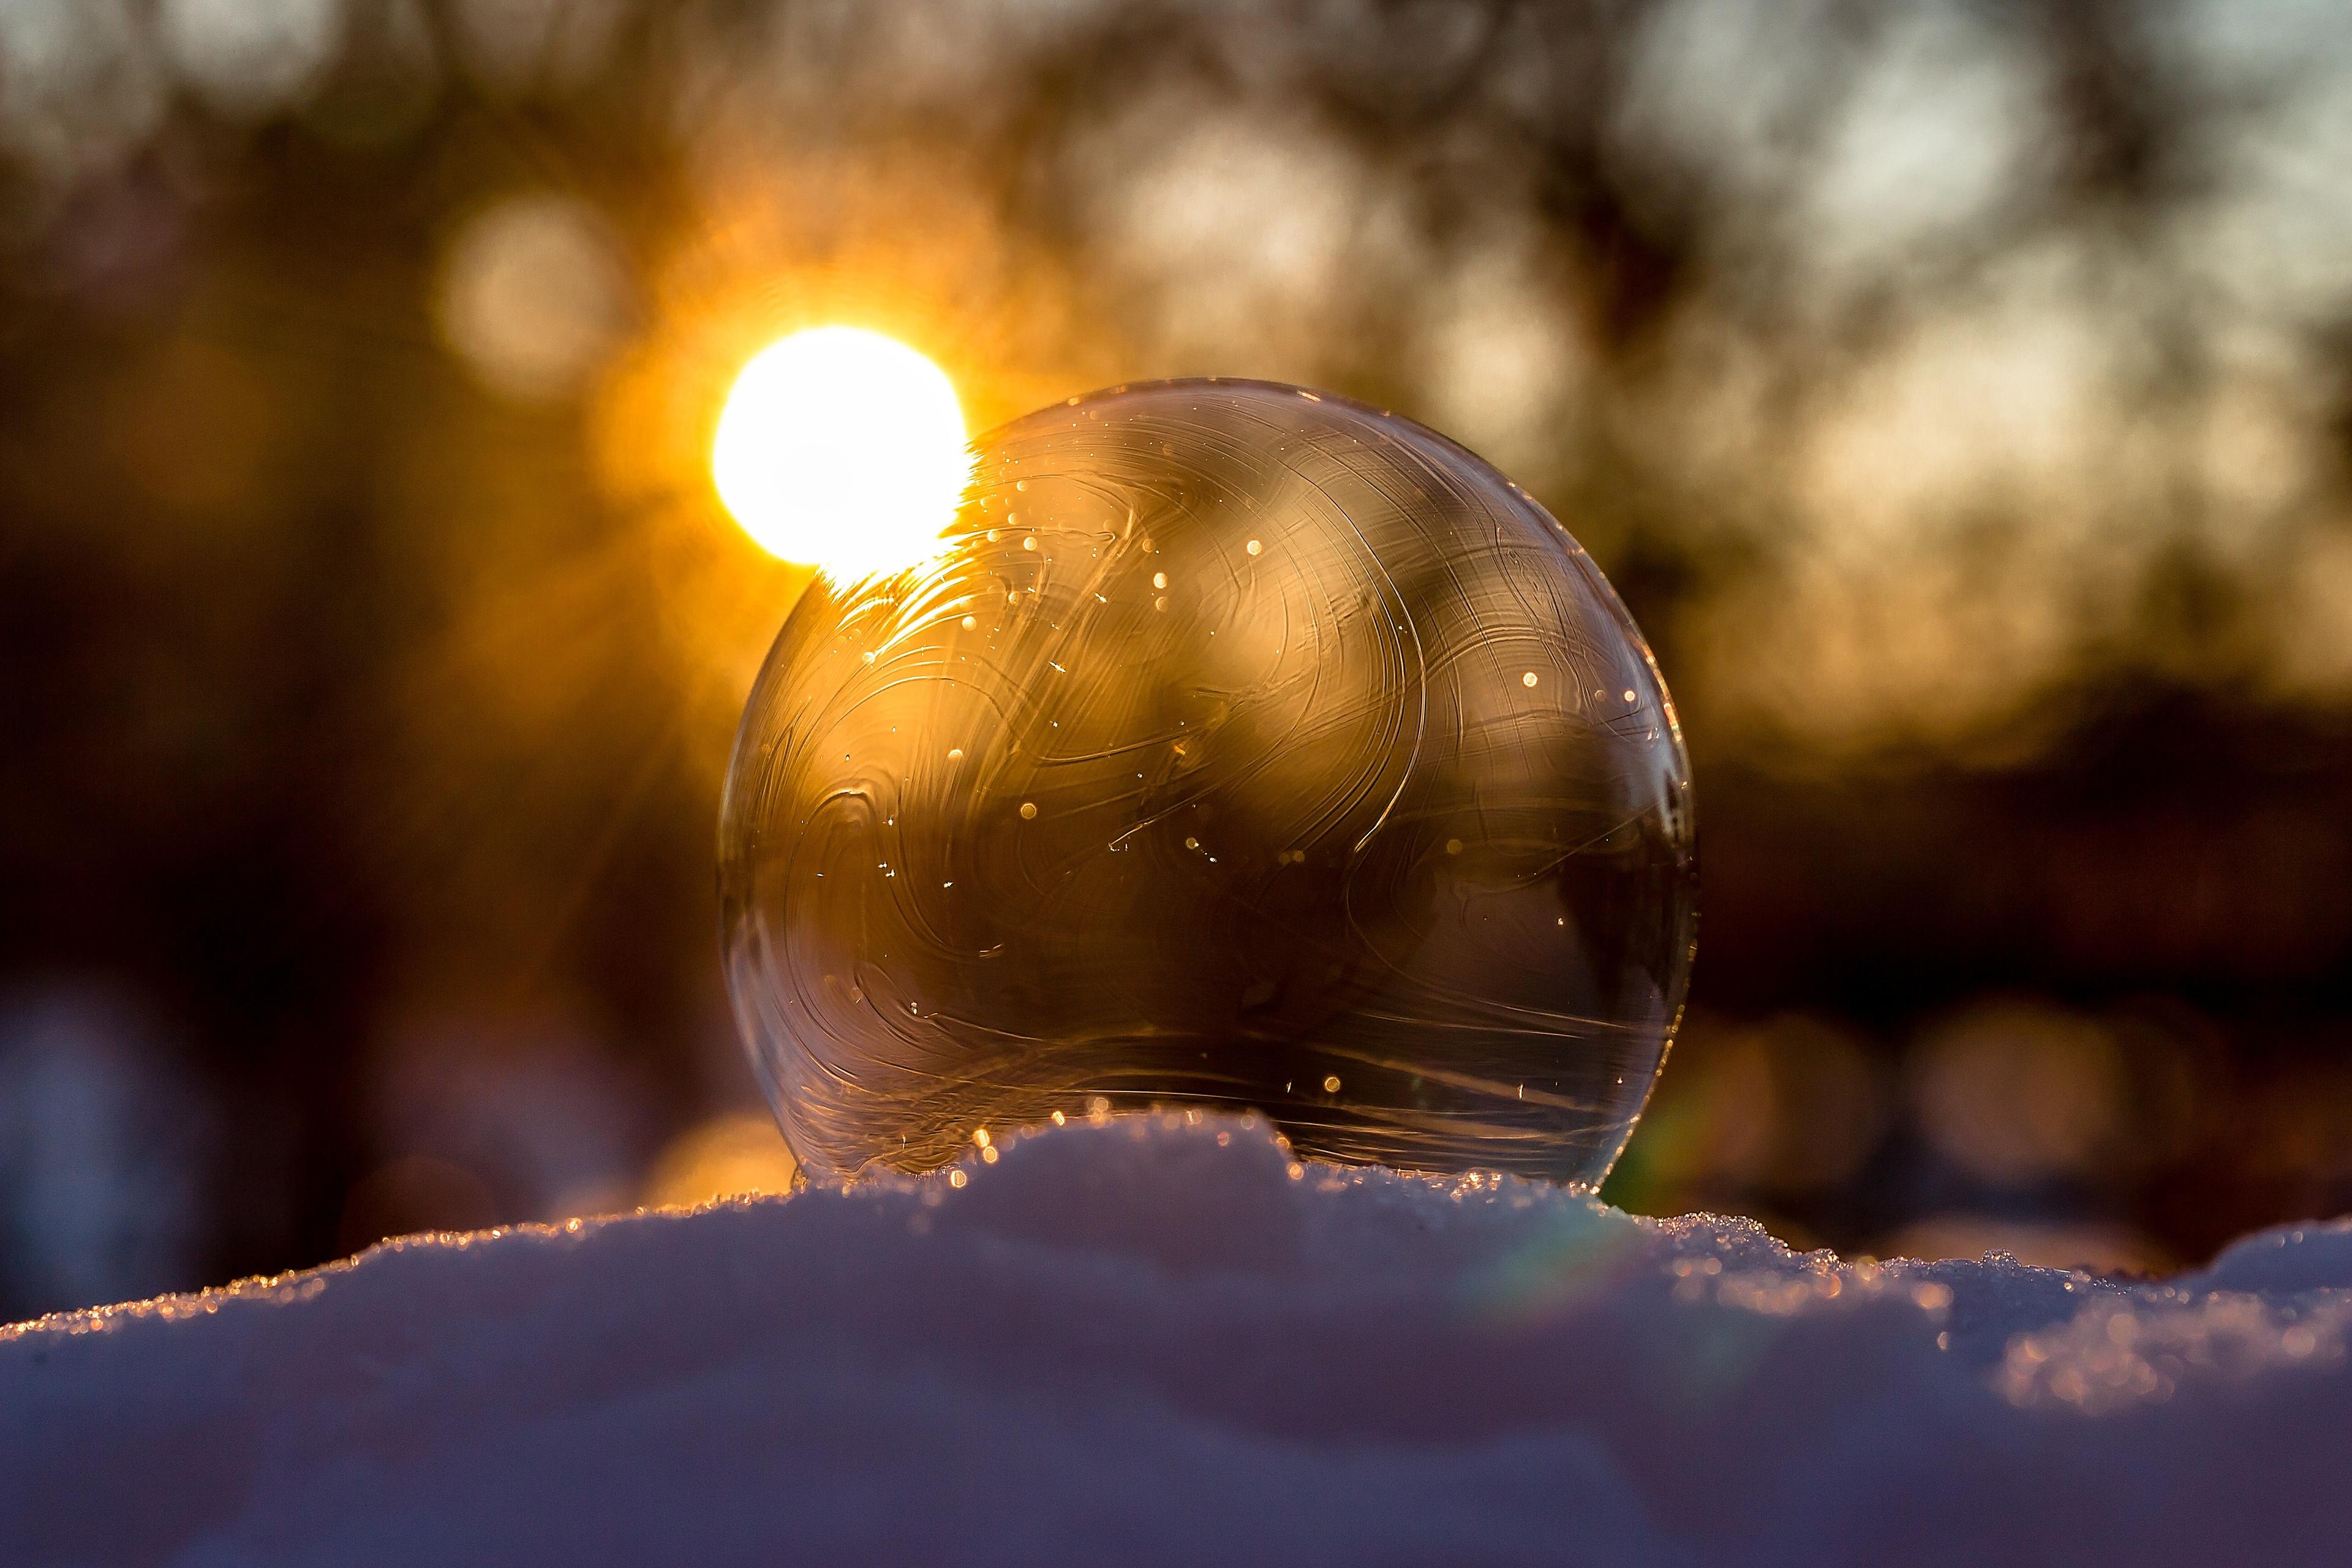 A glass orb resting on the snow with a sunset in the background